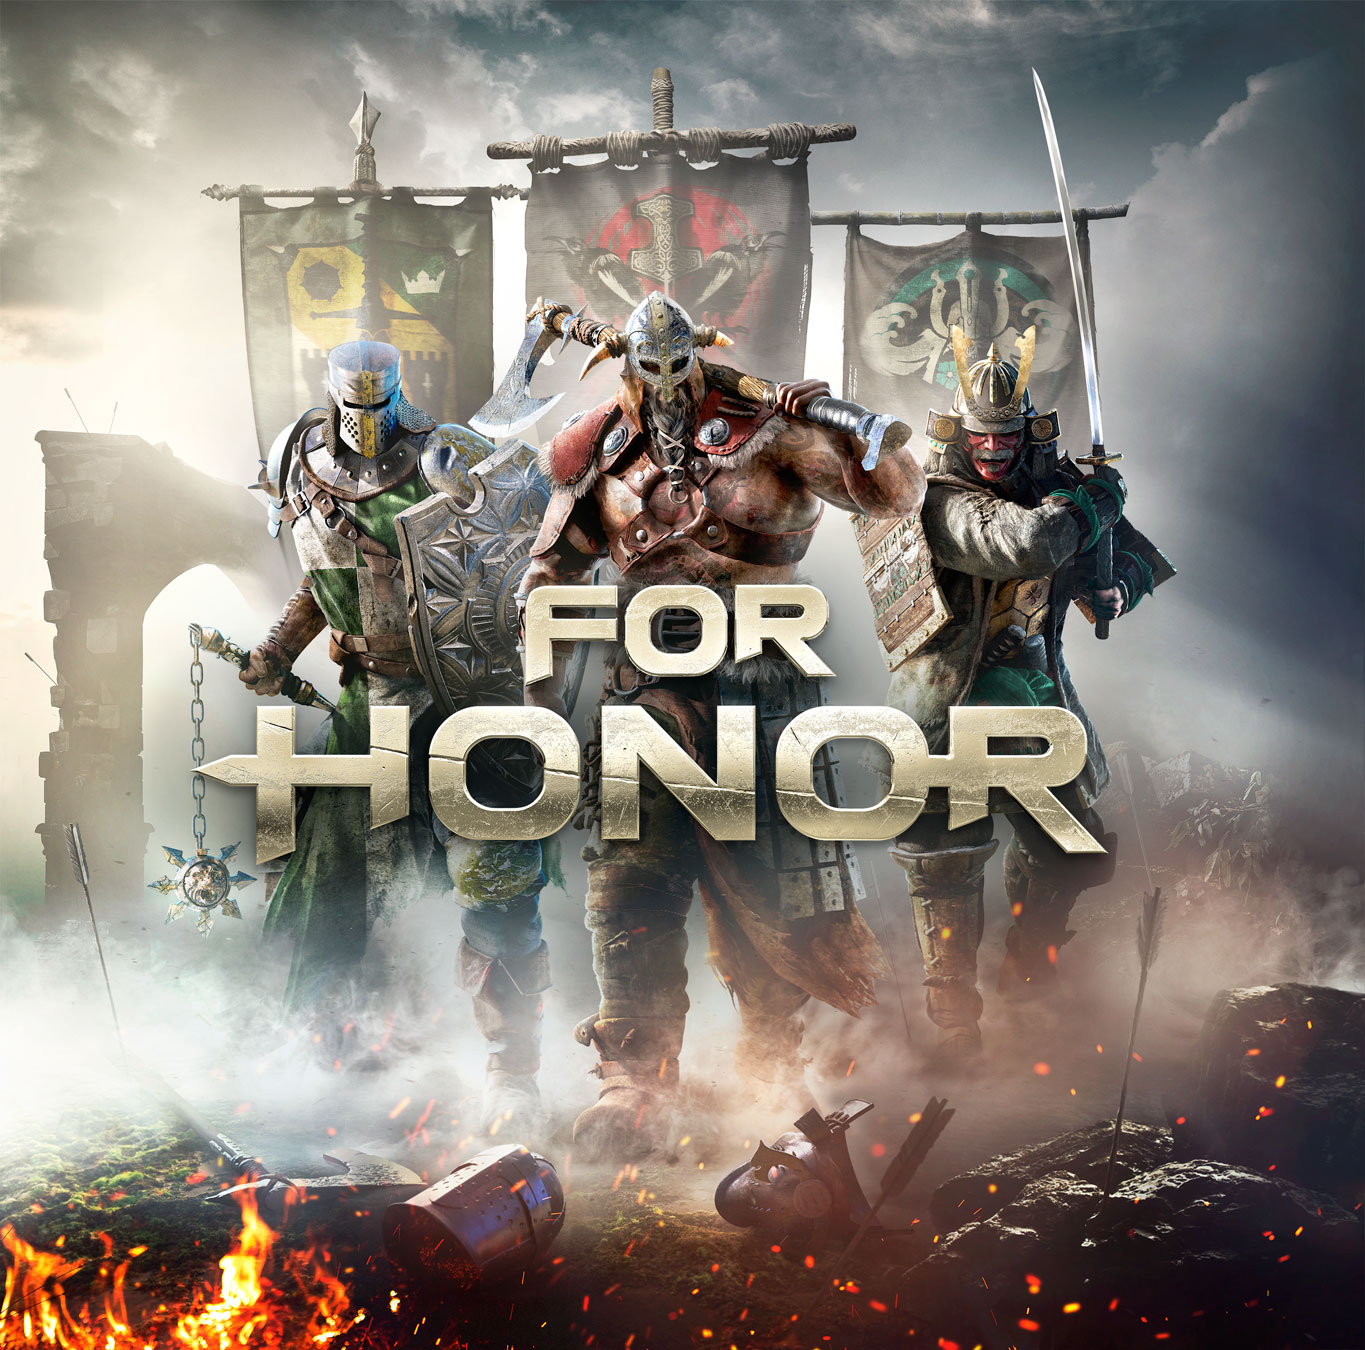 For Honor Beta Running January 26th-29th